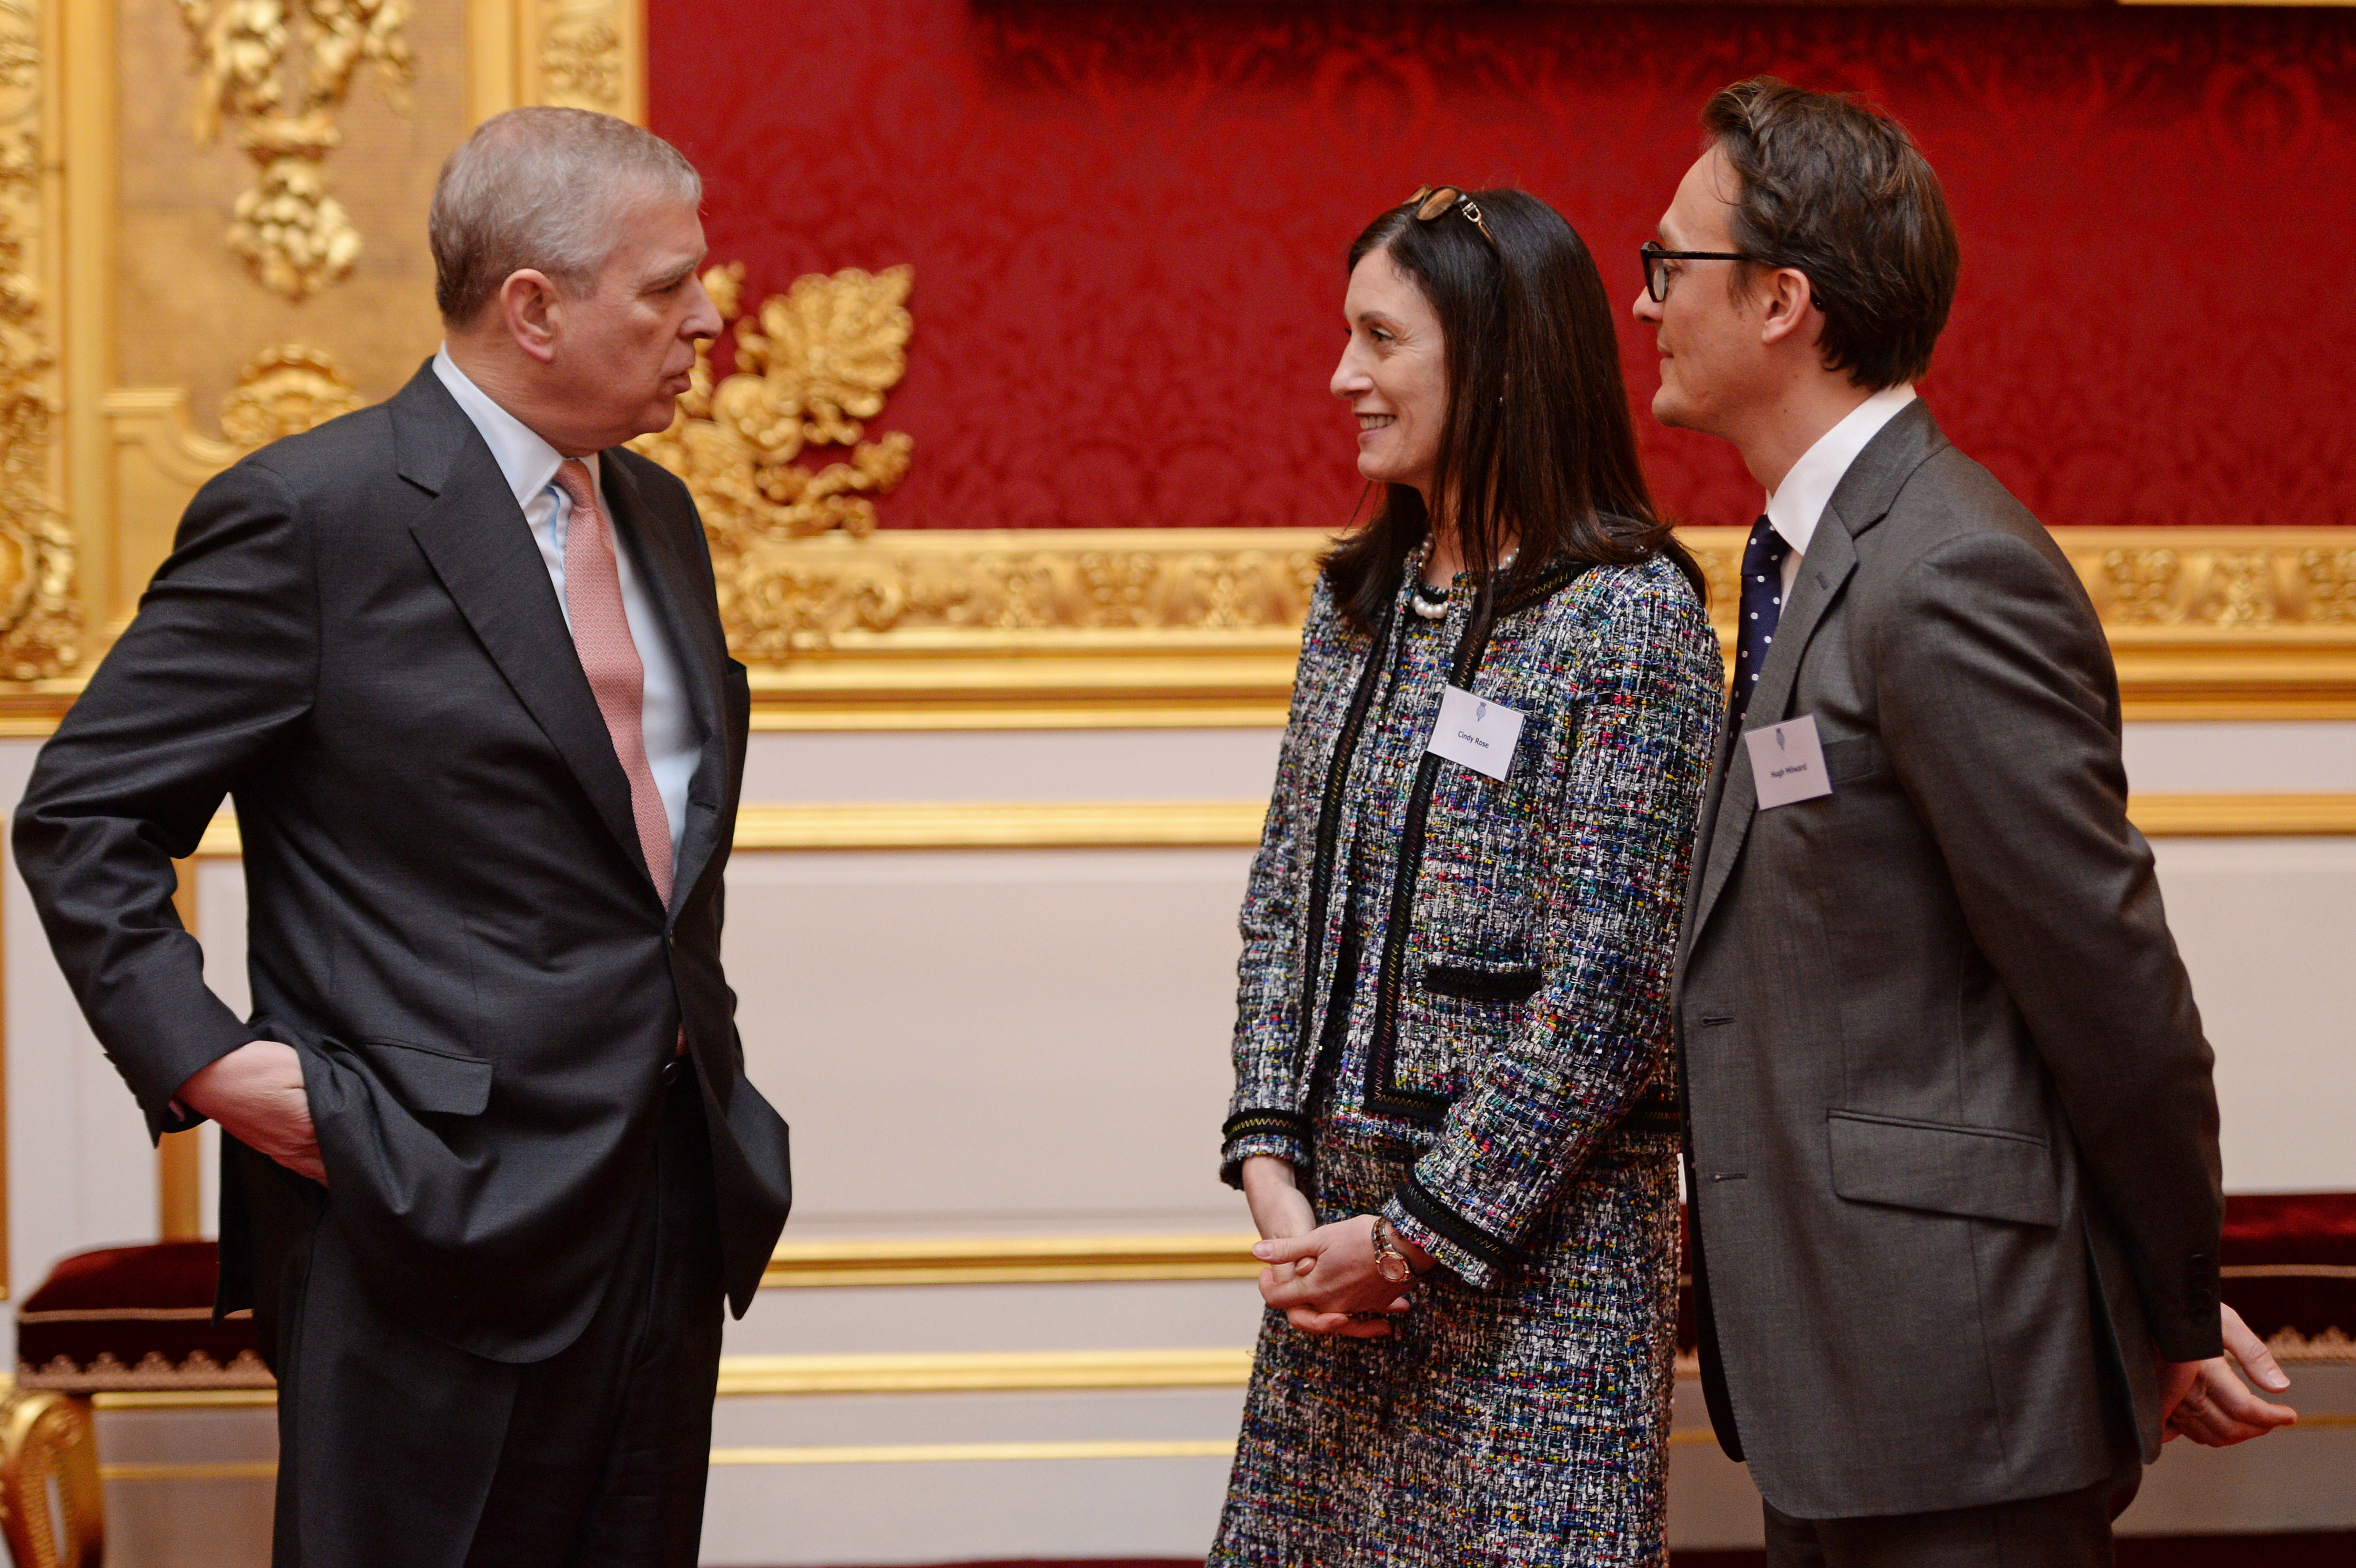 The Duke of York talks with Cindy Rose and Hugh Milward of Microsoft, supporters of the Inspiring Digital Enterprise Award, also known as the IDEA award, at St James' Palace, London.